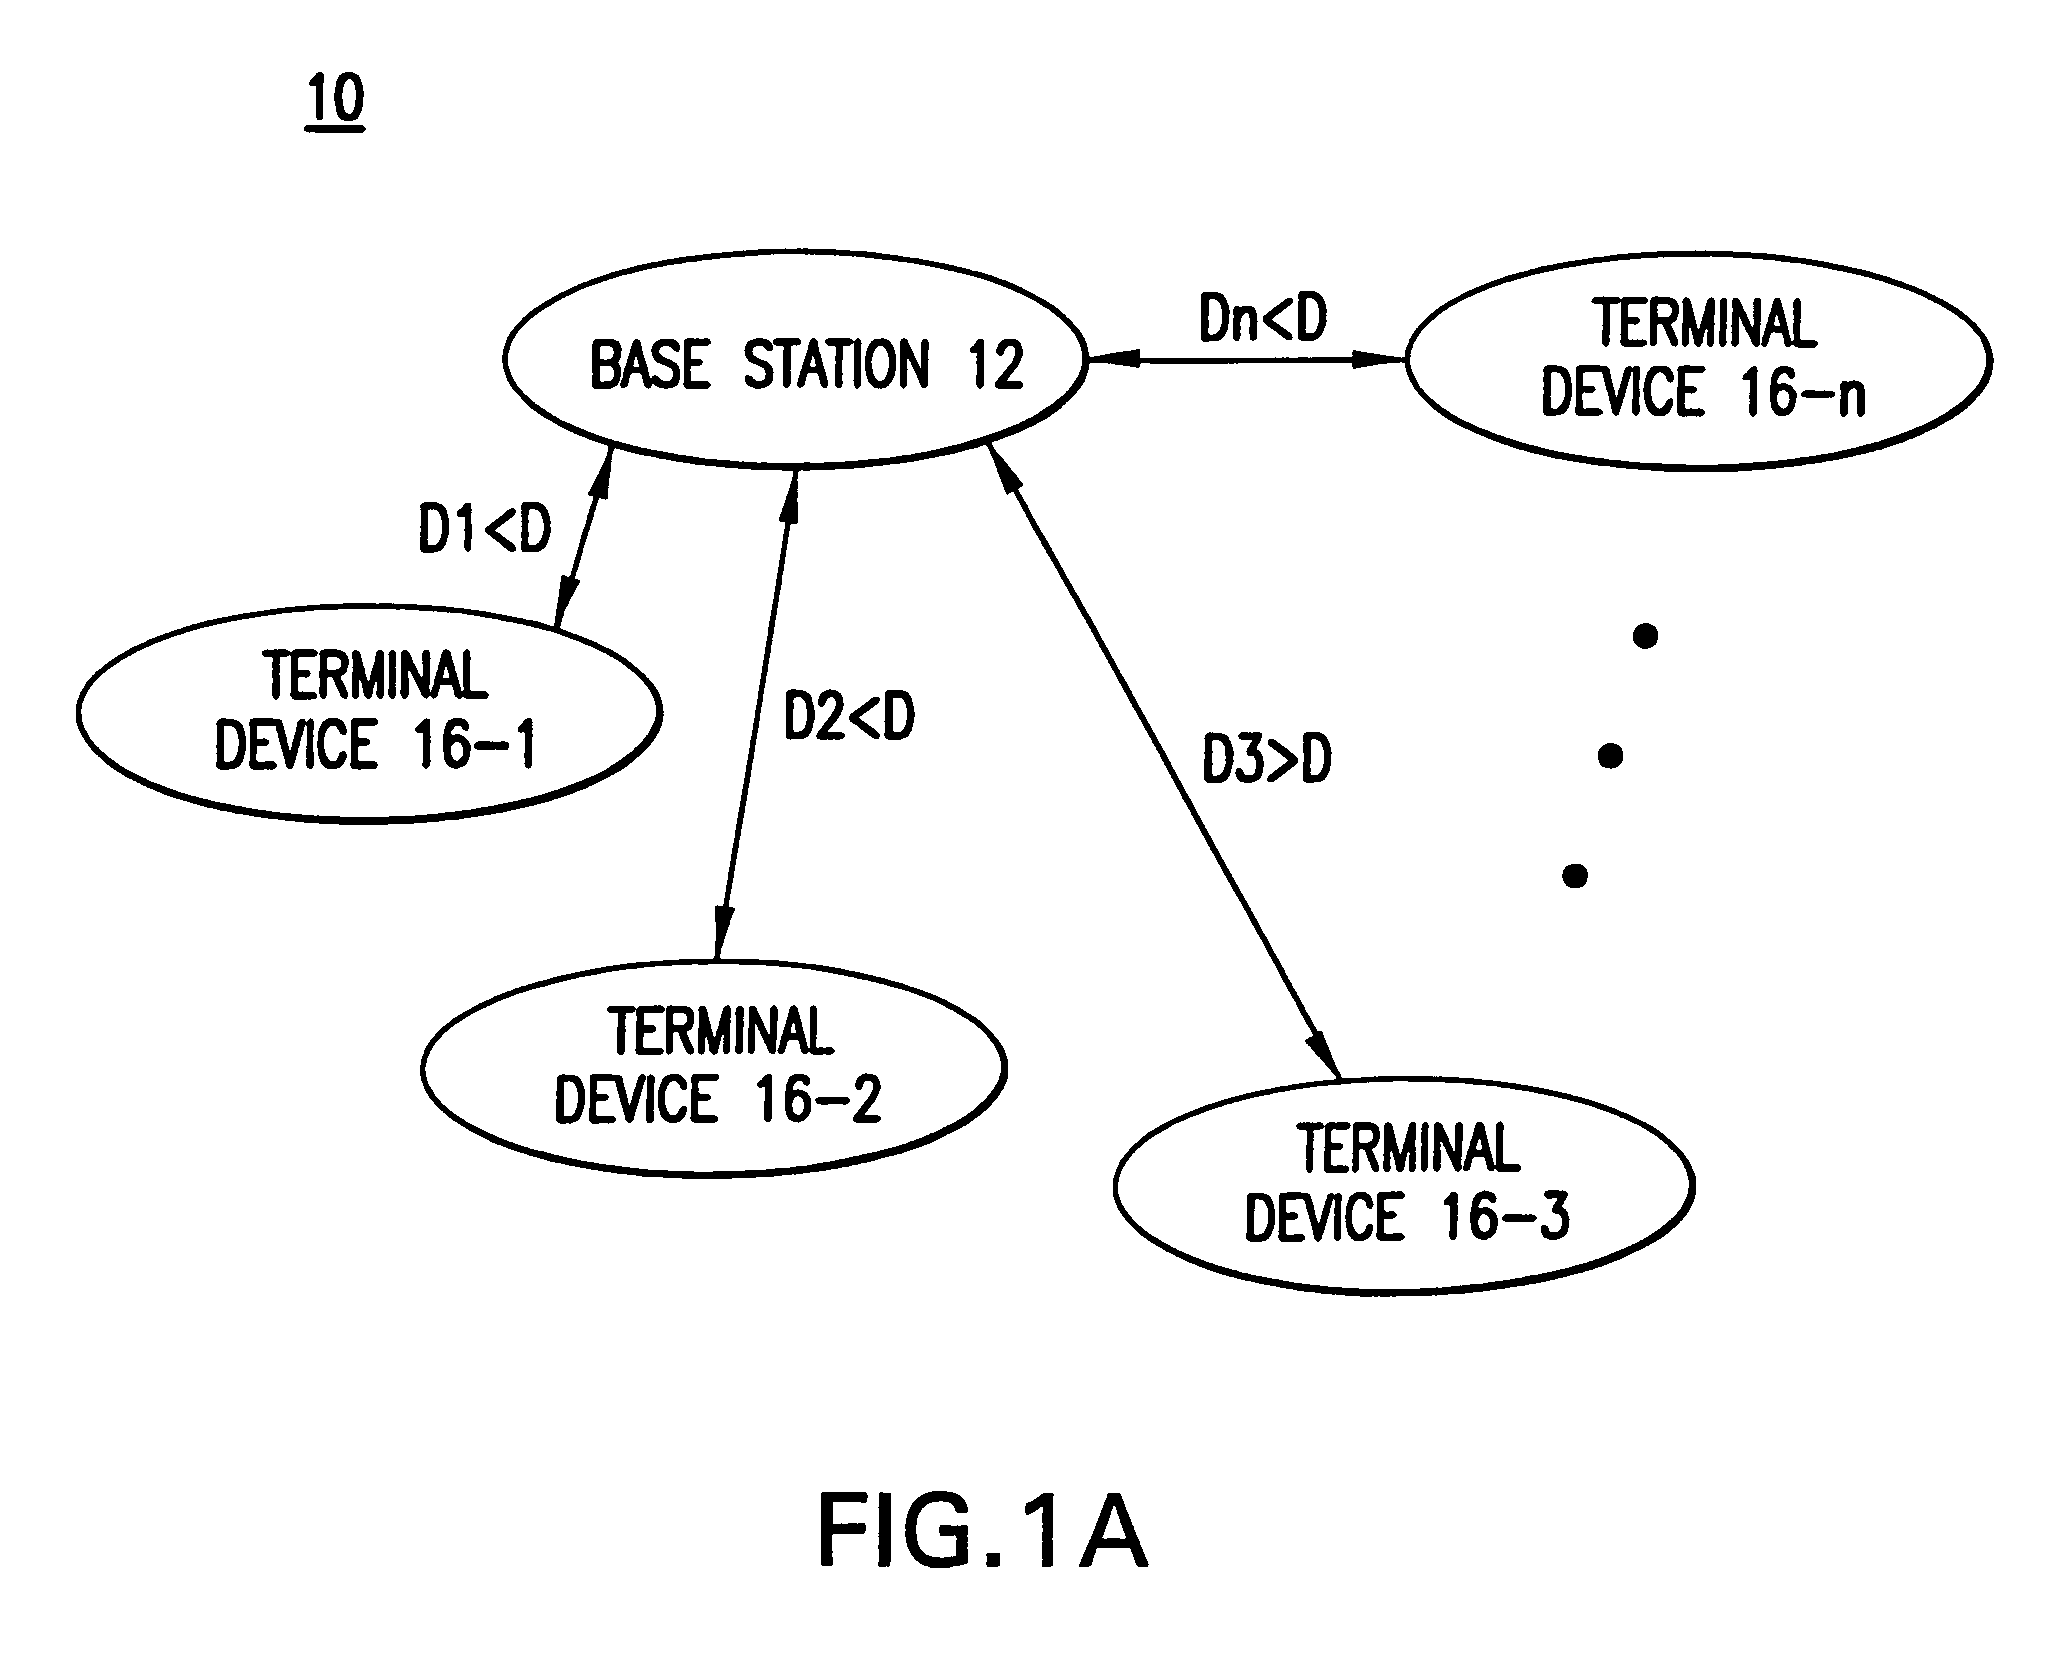 Method and apparatus for bandwidth and frequency management in the U-NII band